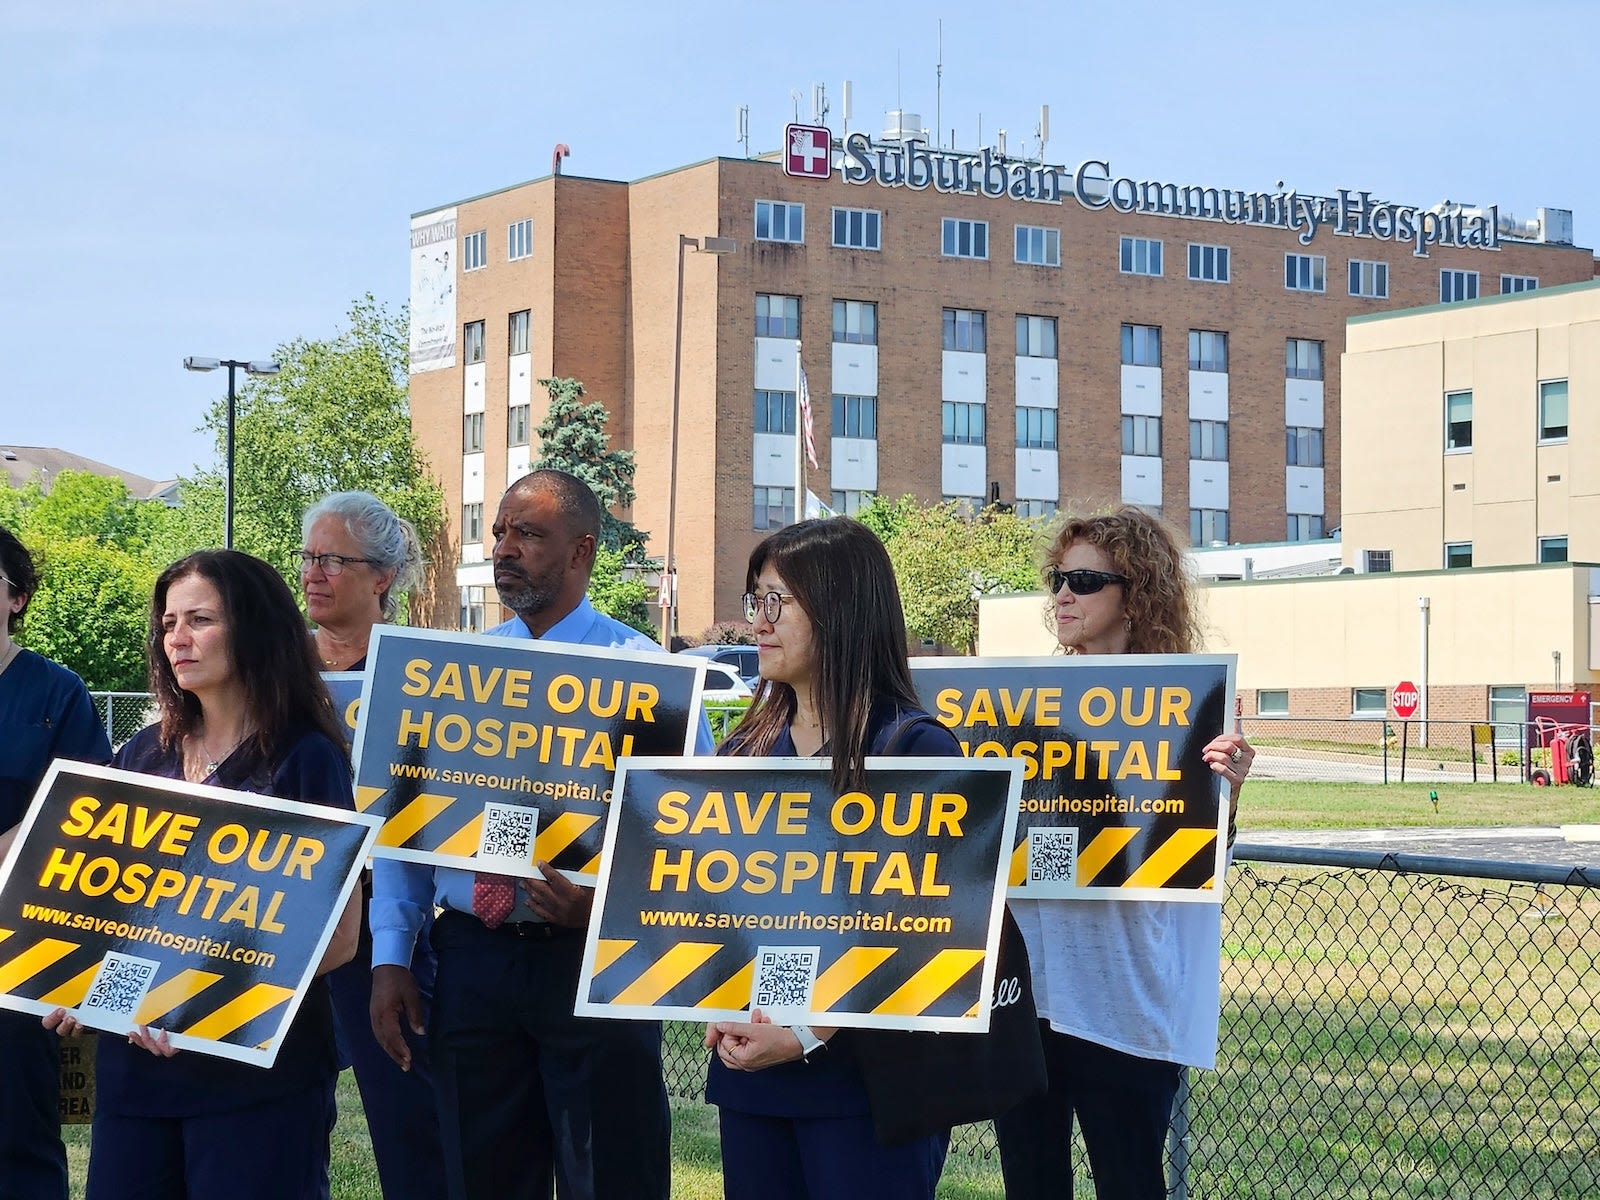 Suburban Community Hospital transitions into a micro-hospital — triggering layoffs of registered nurses and staff